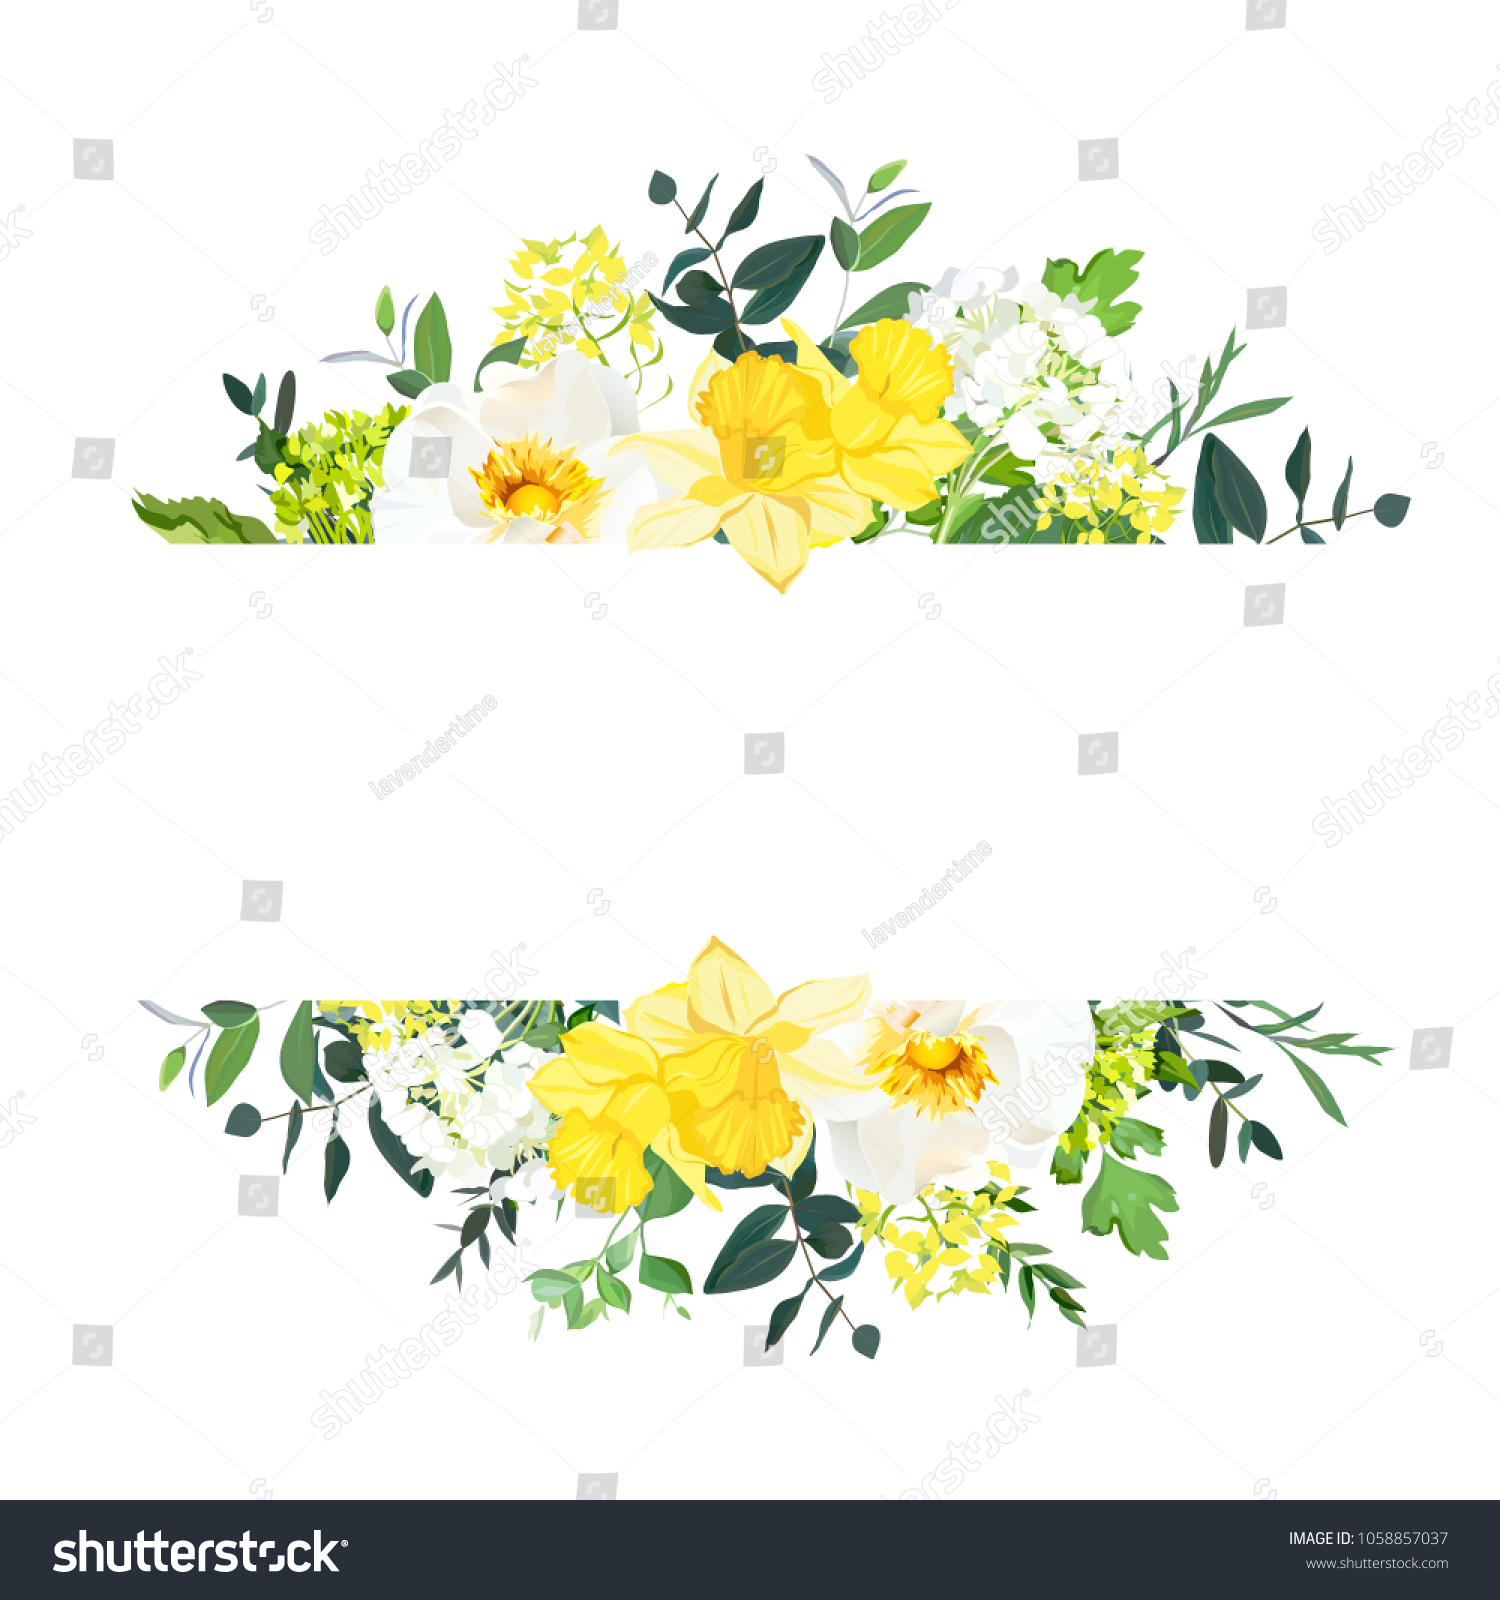 SVG of Yellow wedding horizontal botanical vector design banner. Daffodil, wild rose, white and green hydrangea, eucalyptus and wildflowers.Composition isolated on white background. All elements are editable svg